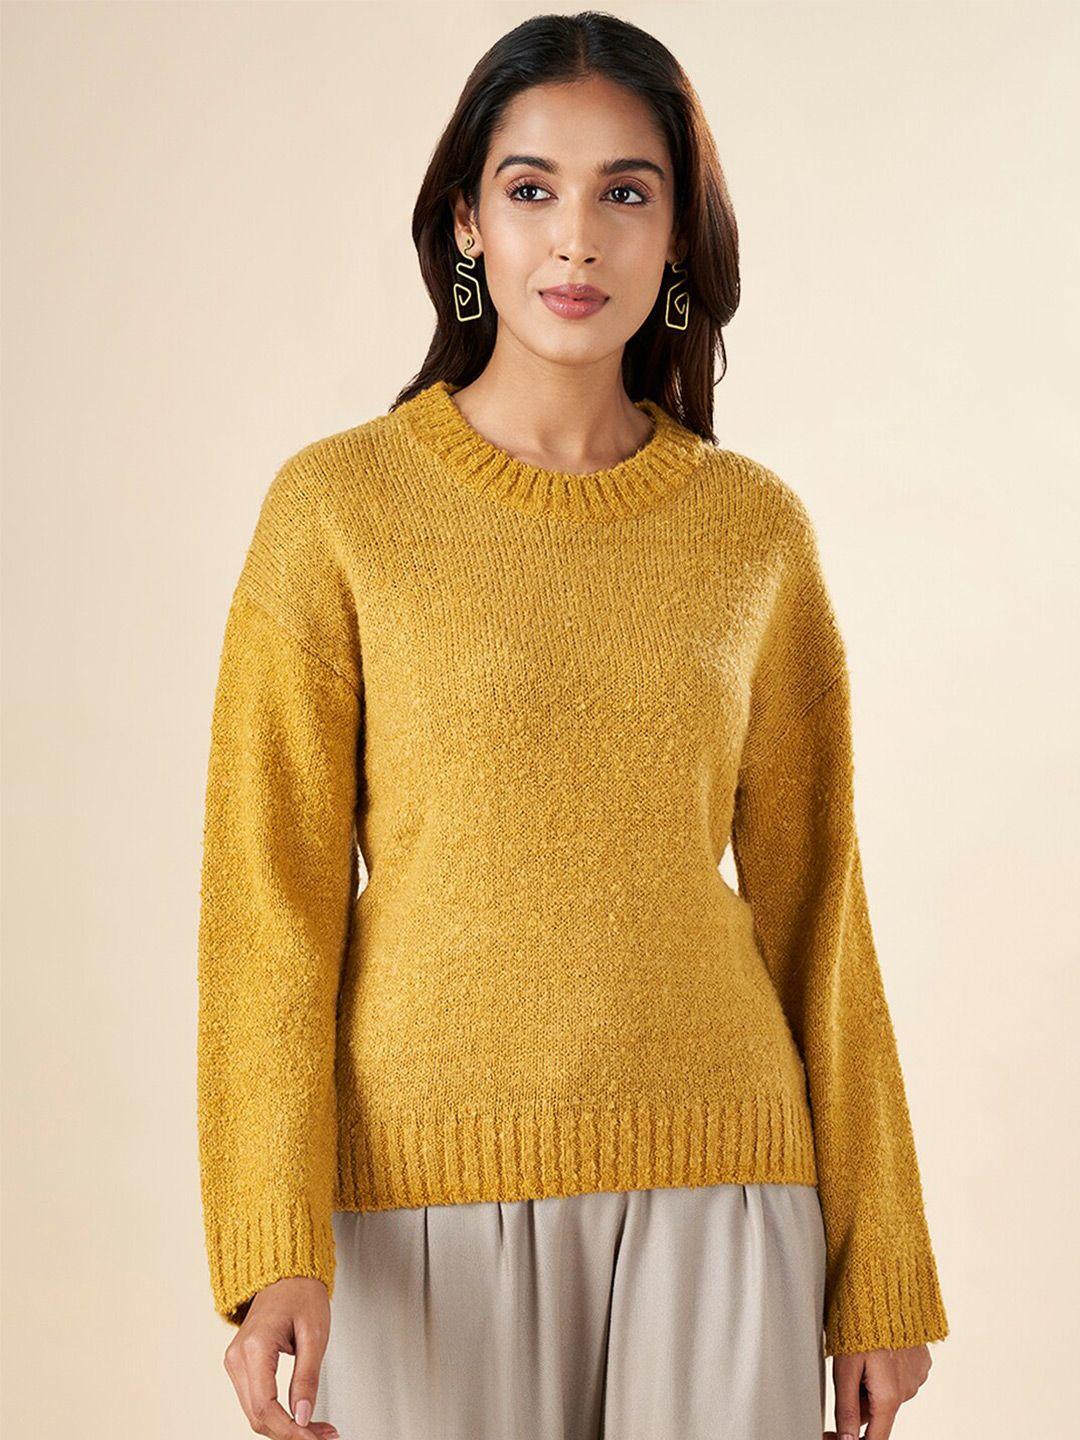 AKKRITI BY PANTALOONS Long Sleeves Round Neck Acrylic Pullover Sweater